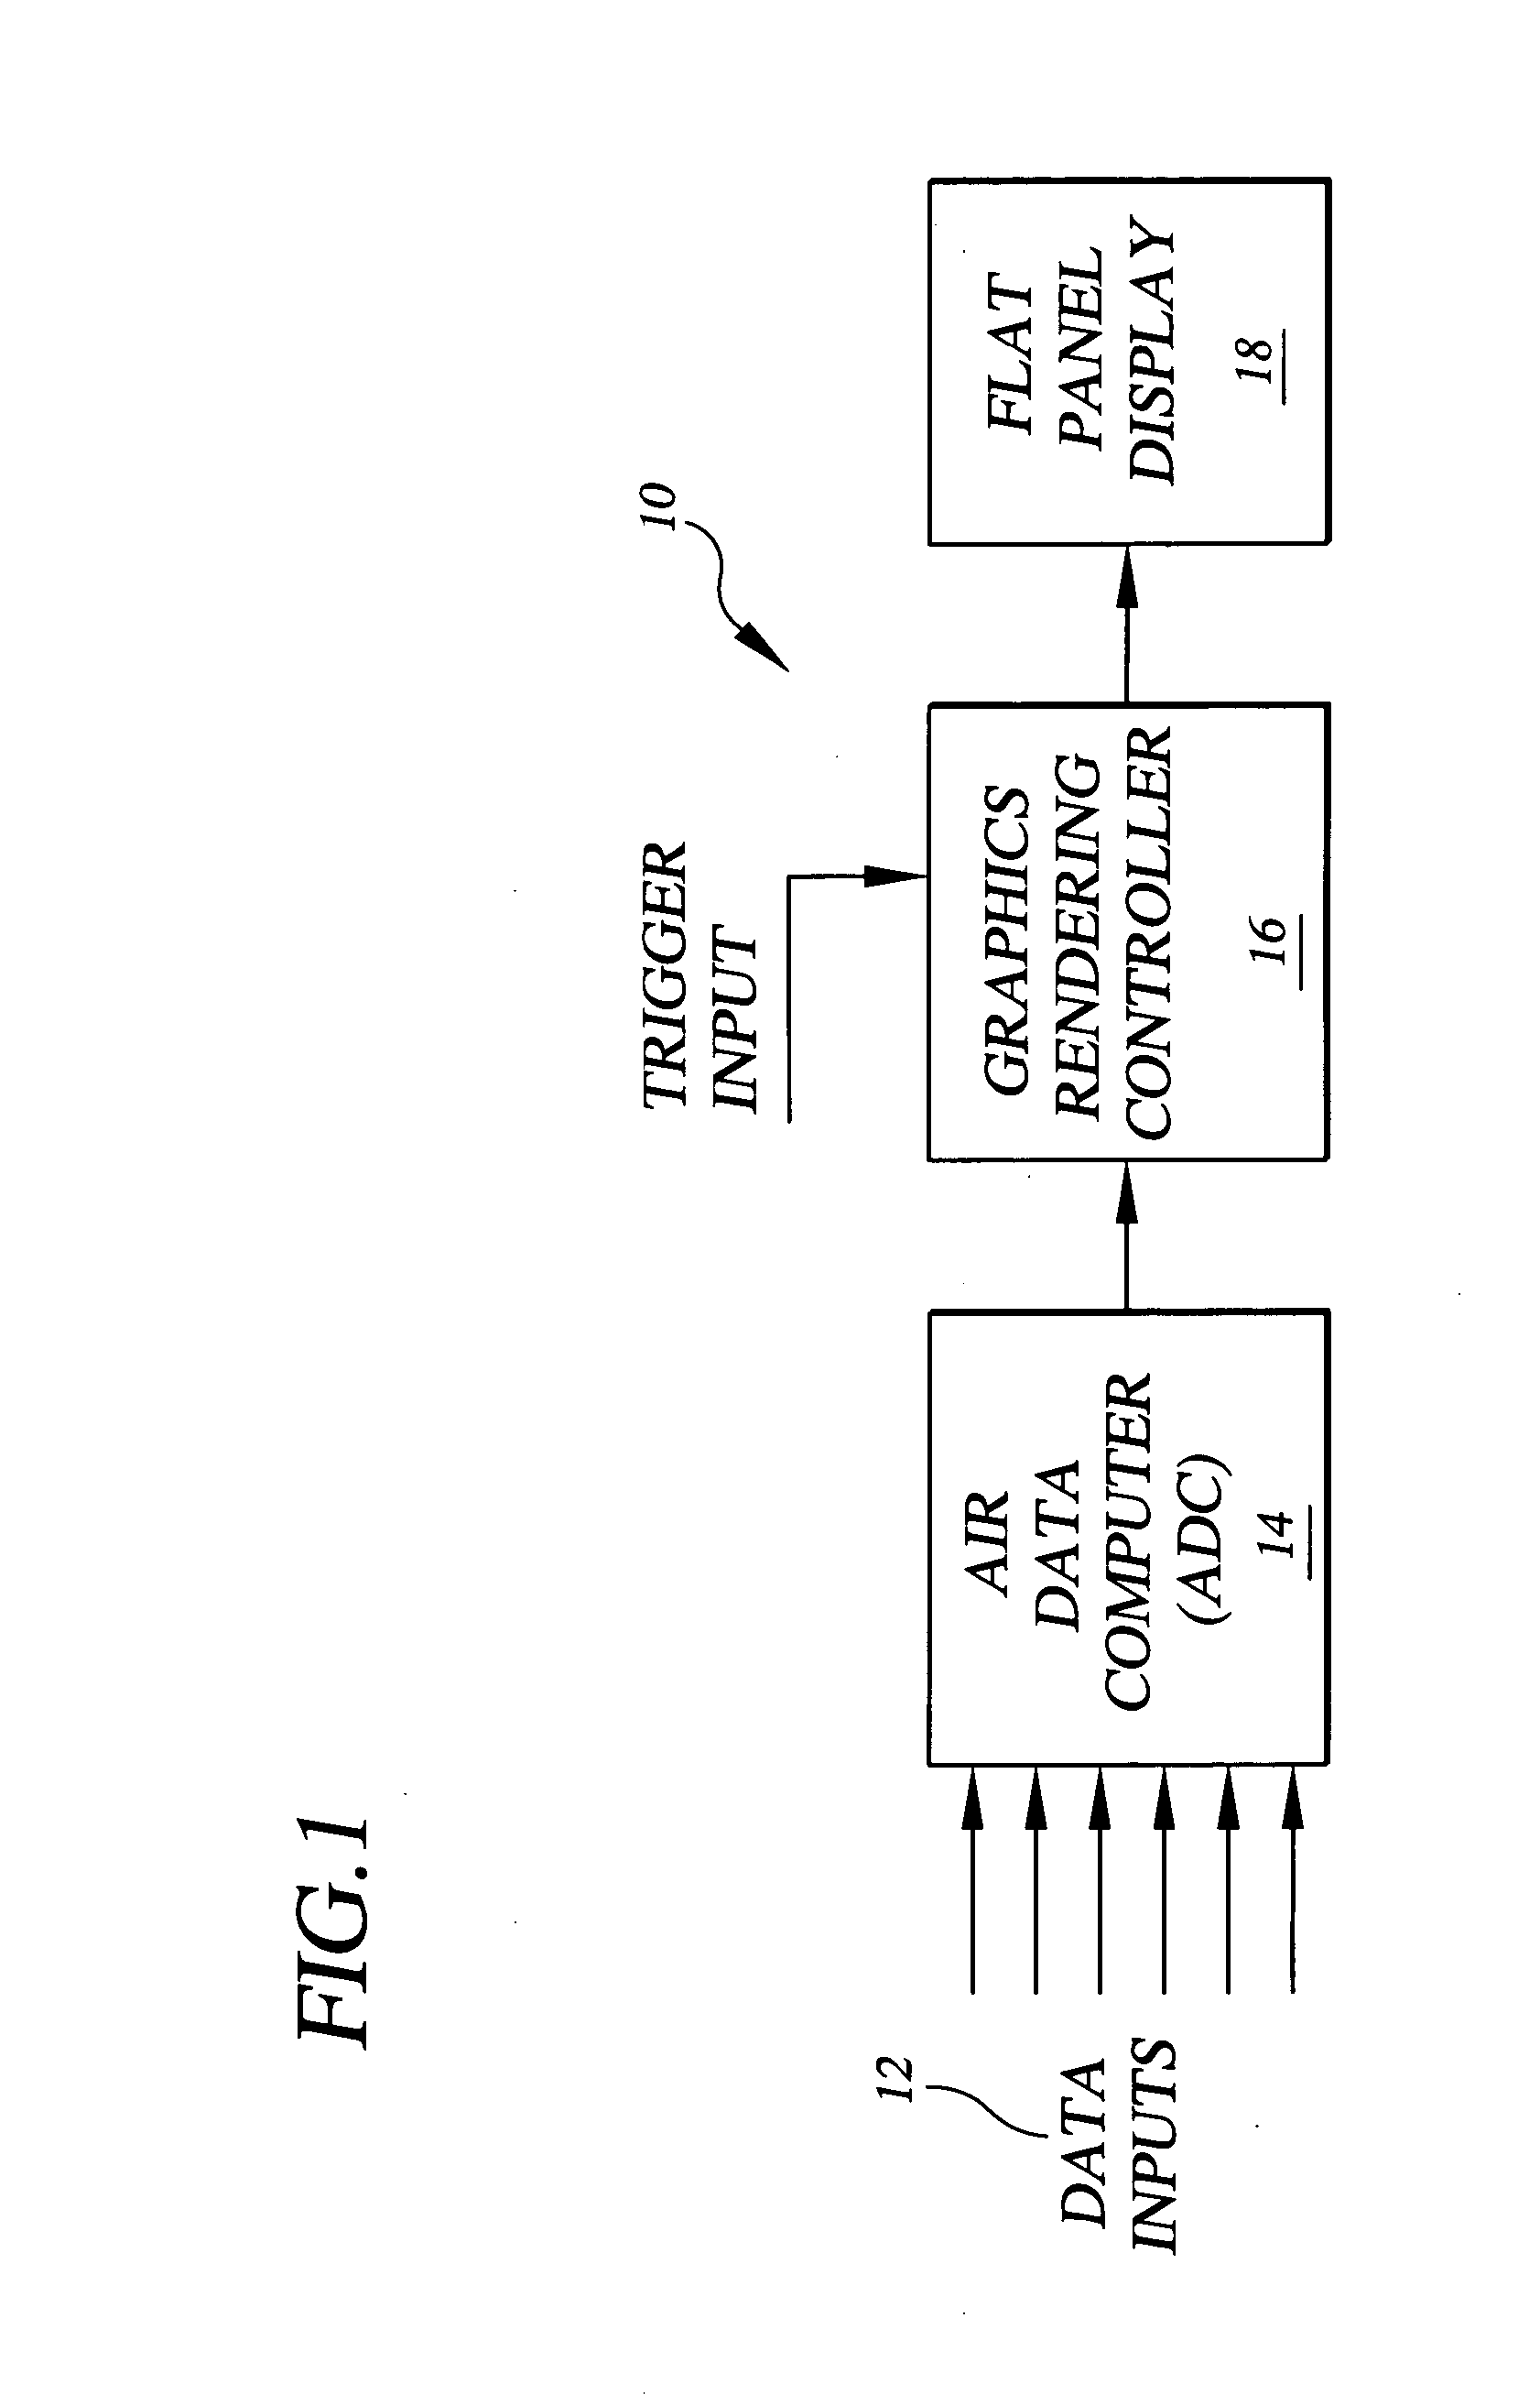 Method and apparatus for facilitating entry of manually-adjustable data setting in an aircraft cockpit